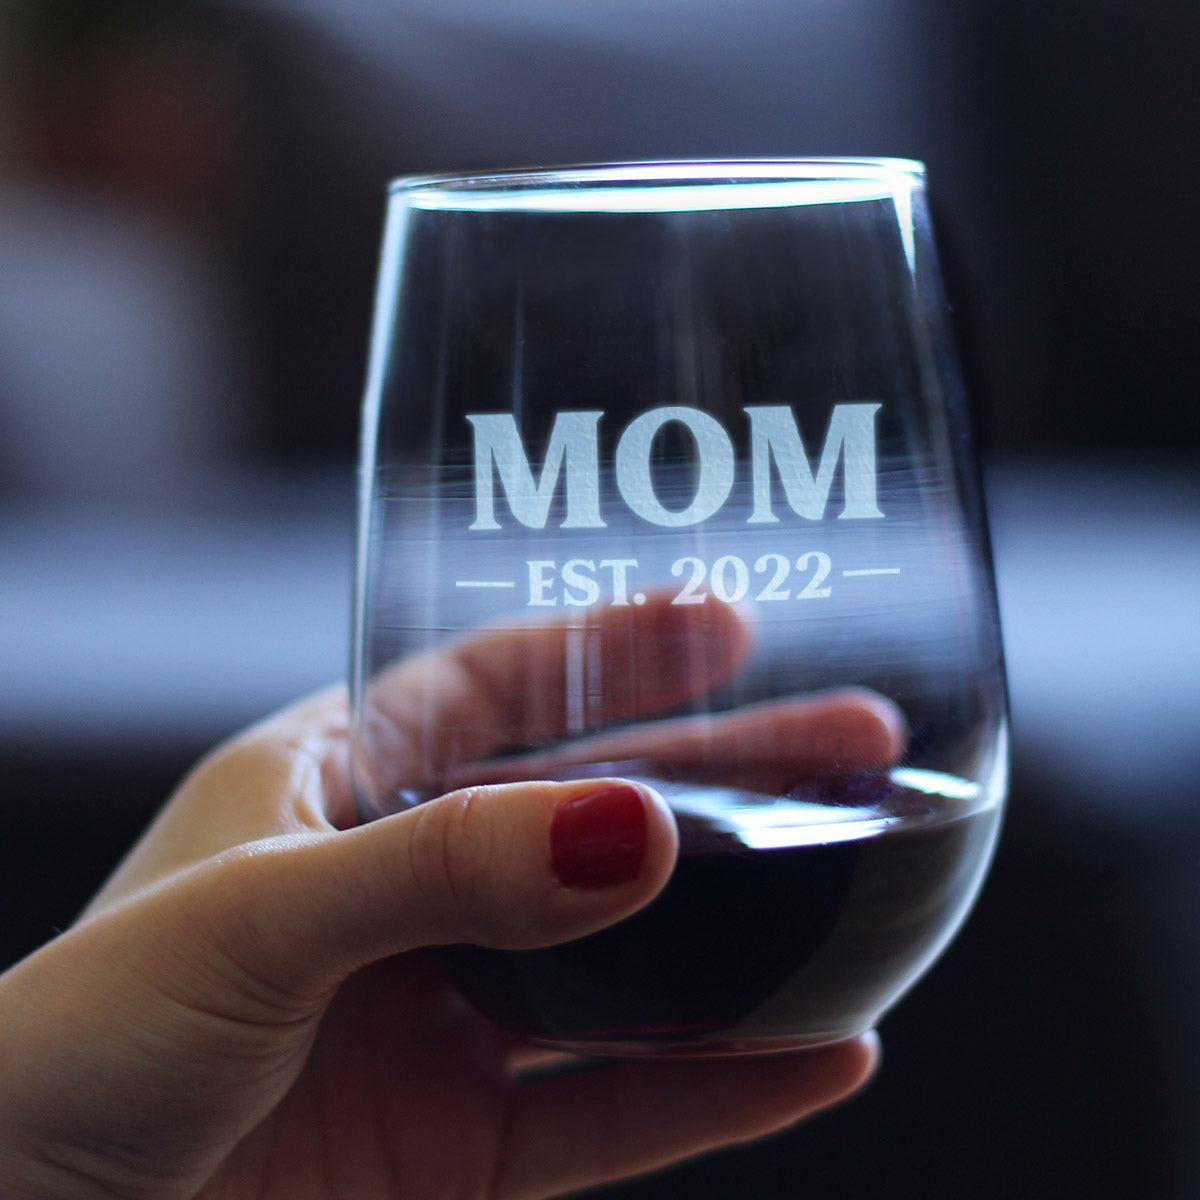 Mom Est 2022 - New Mother Stemless Wine Glass Gift for First Time Parents - Bold 17 Oz Large Glasses